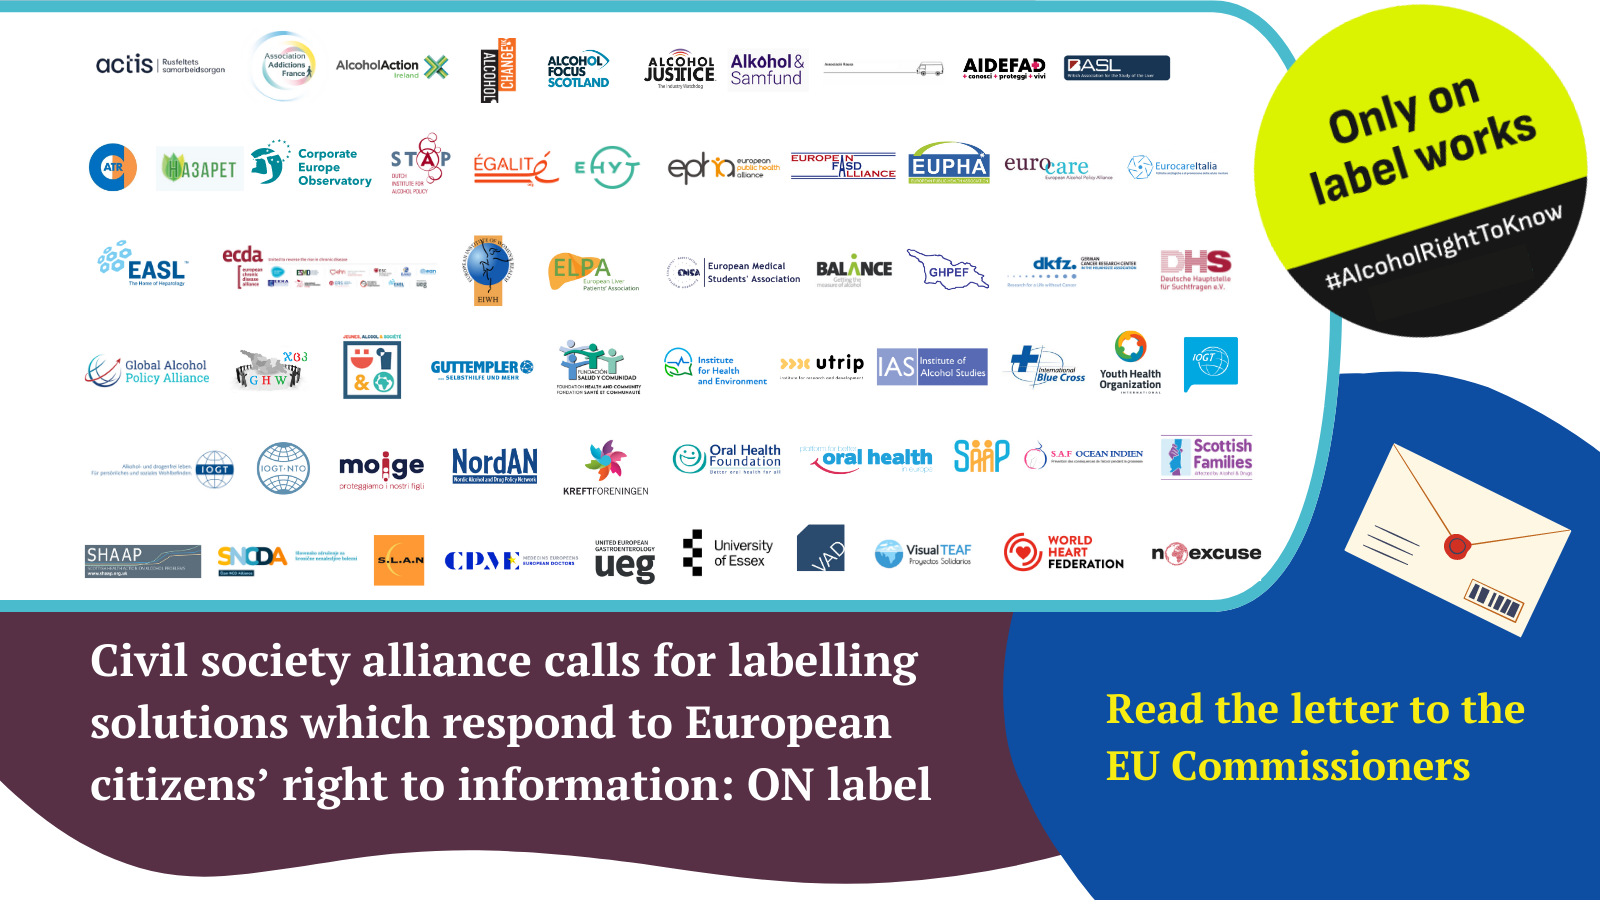 PRESS RELEASE: Civil society calls on the EC to release mandatory alcohol labelling proposal immediately